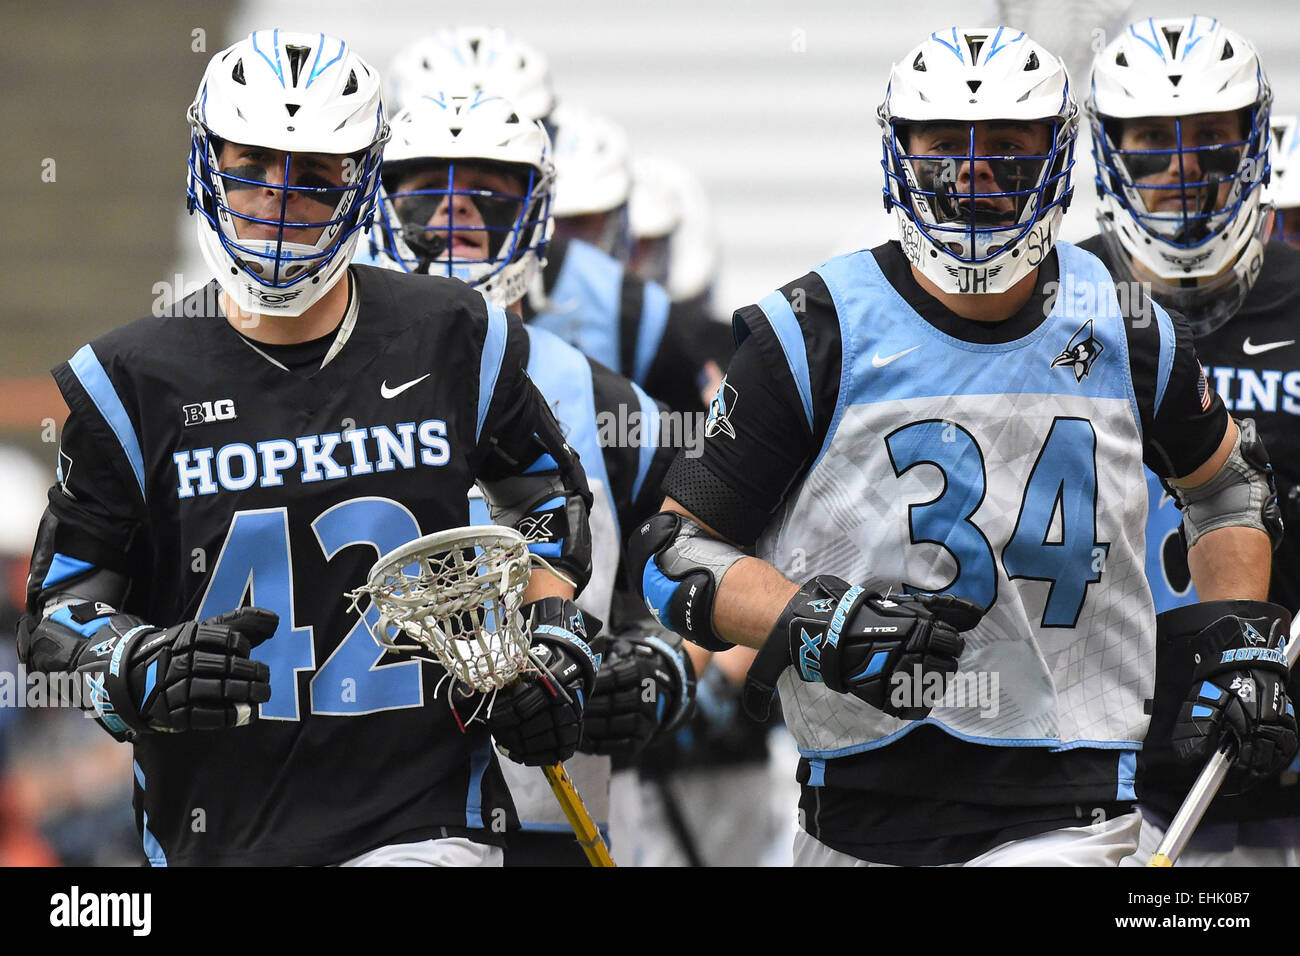 Syracuse, New York, USA. 14th Mar, 2015. Johns Hopkins Blue Jays attackman Wells Stanwick (42) and defenseman Michael Pellegrino (34) lead the team on the field prior to a NCAA men's lacrosse game between the Johns Hopkins Blue Jays and the Syracuse Orange at the Carrier Dome in Syracuse, New York. Syracuse defeated Johns Hopkins 13-10. Rich Barnes/CSM/Alamy Live News Stock Photo